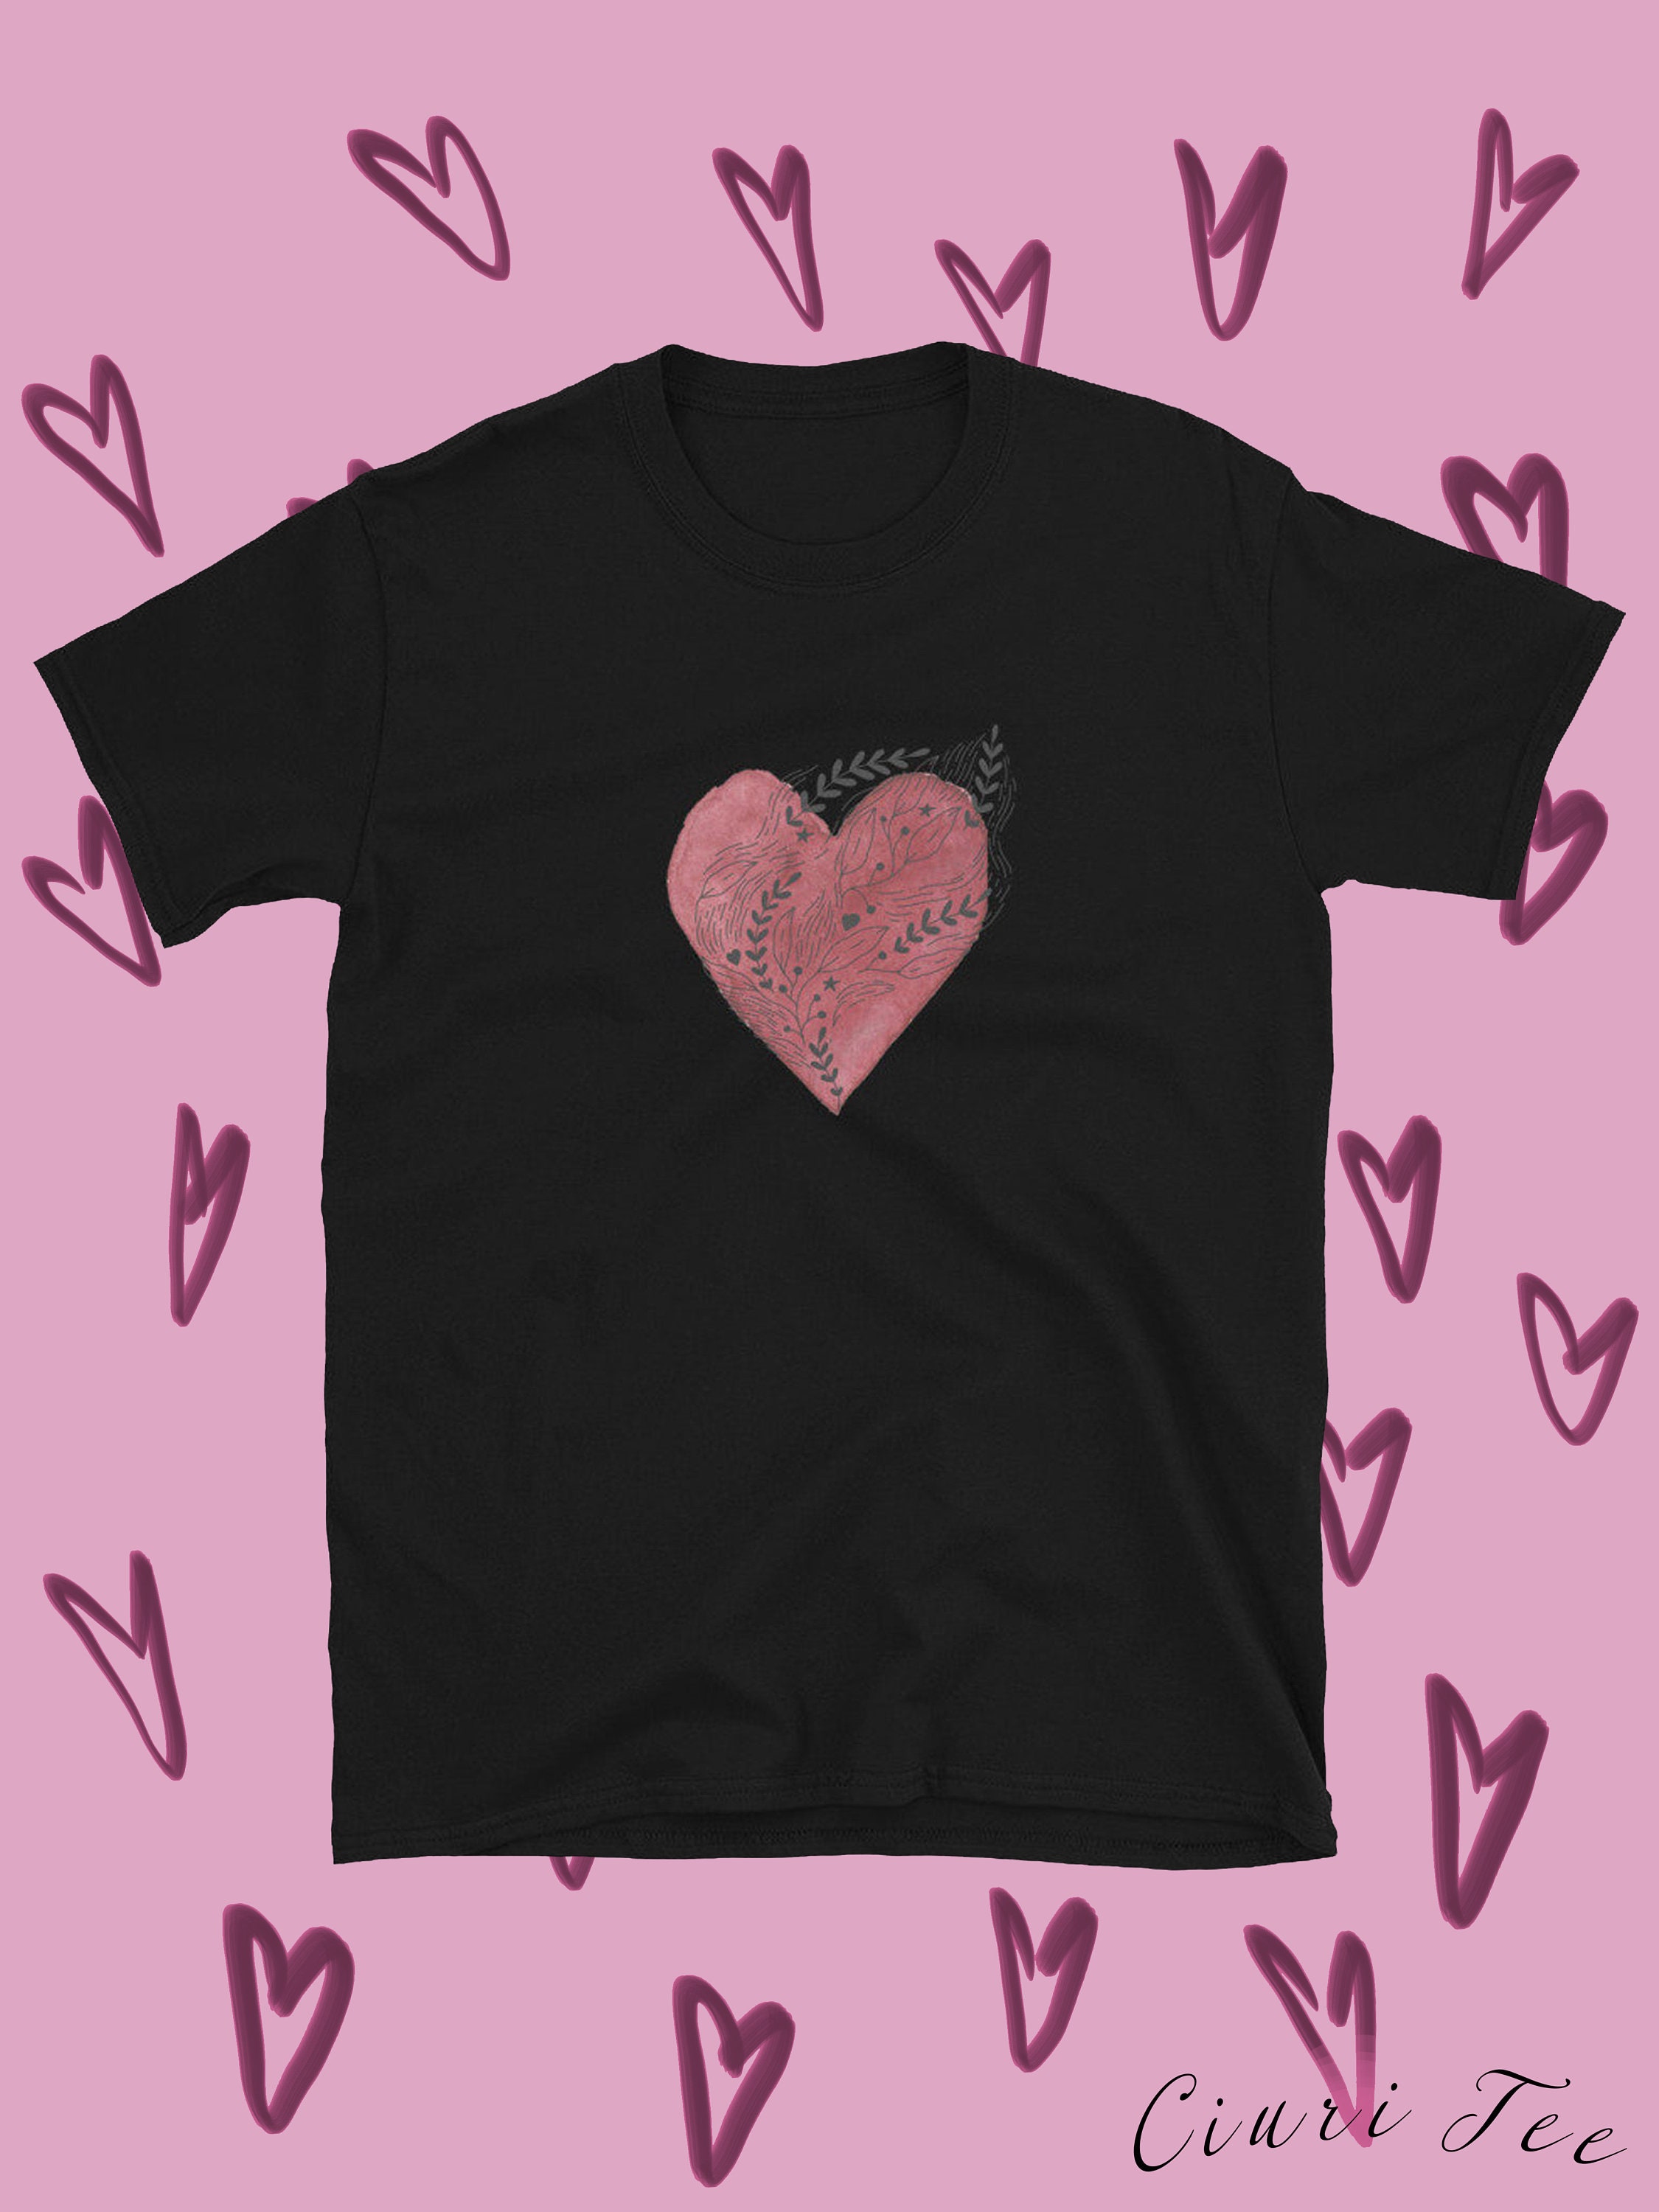 Pink Watercolor Heart Shirt With Plant and Feathers Tee - Etsy